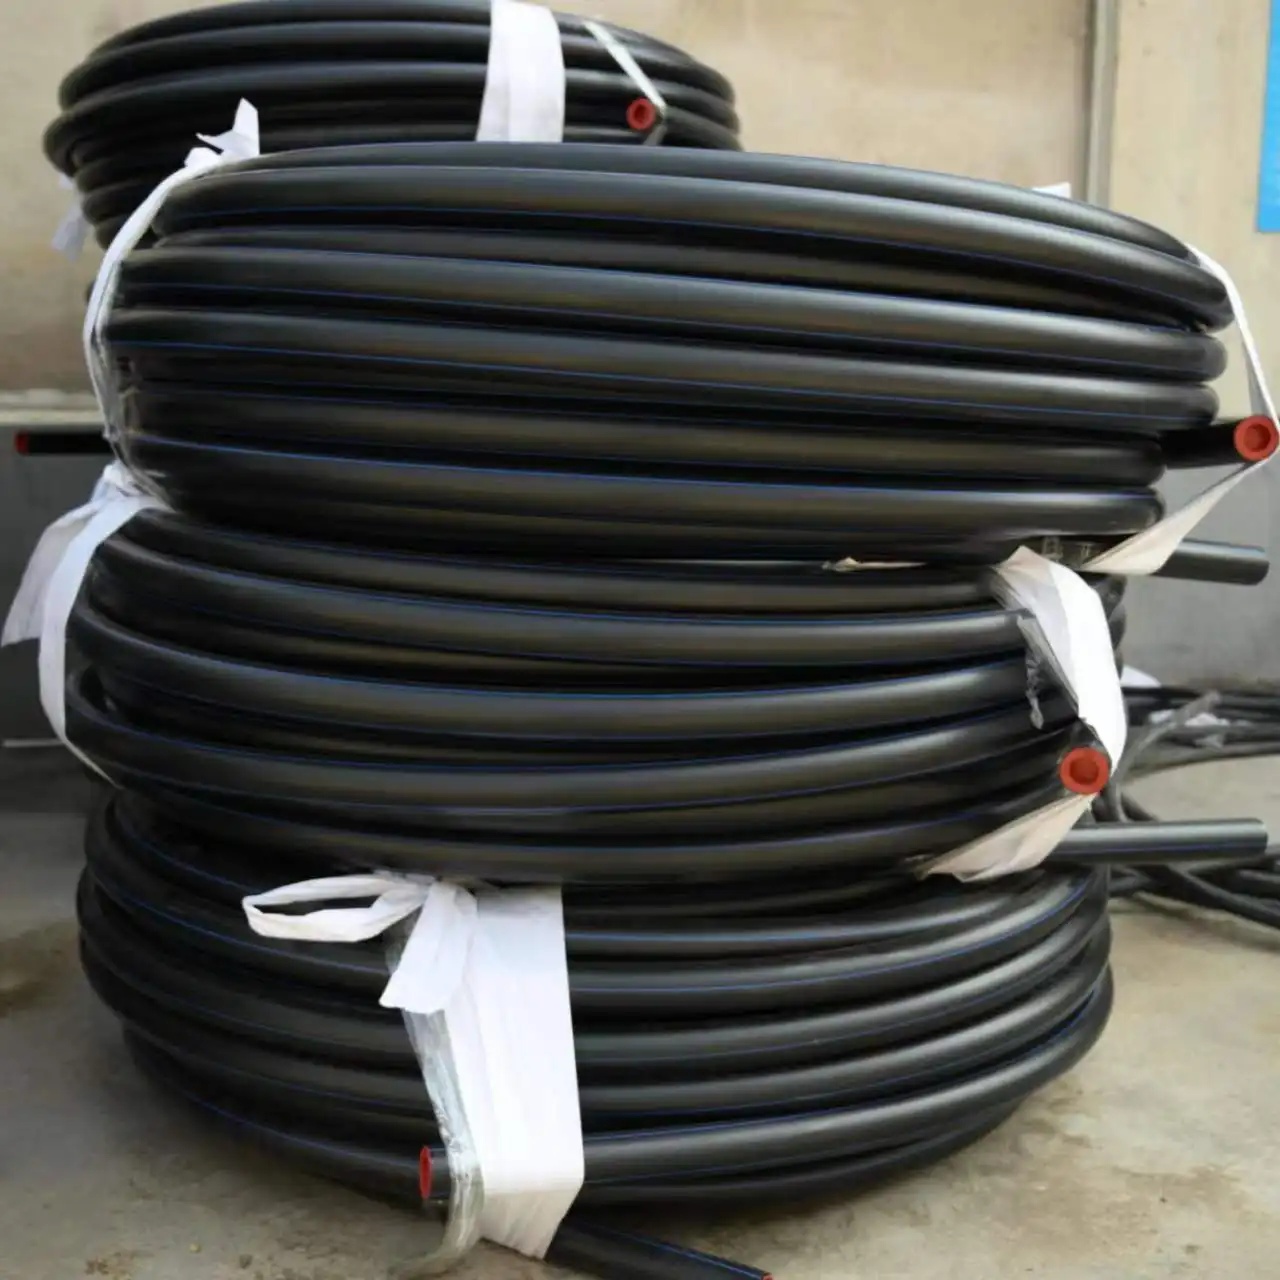 Jiangte dn20 to dn63 Diameter HDPE Water Supply Pipe plastic Rolls Coils irrigation poly pipe